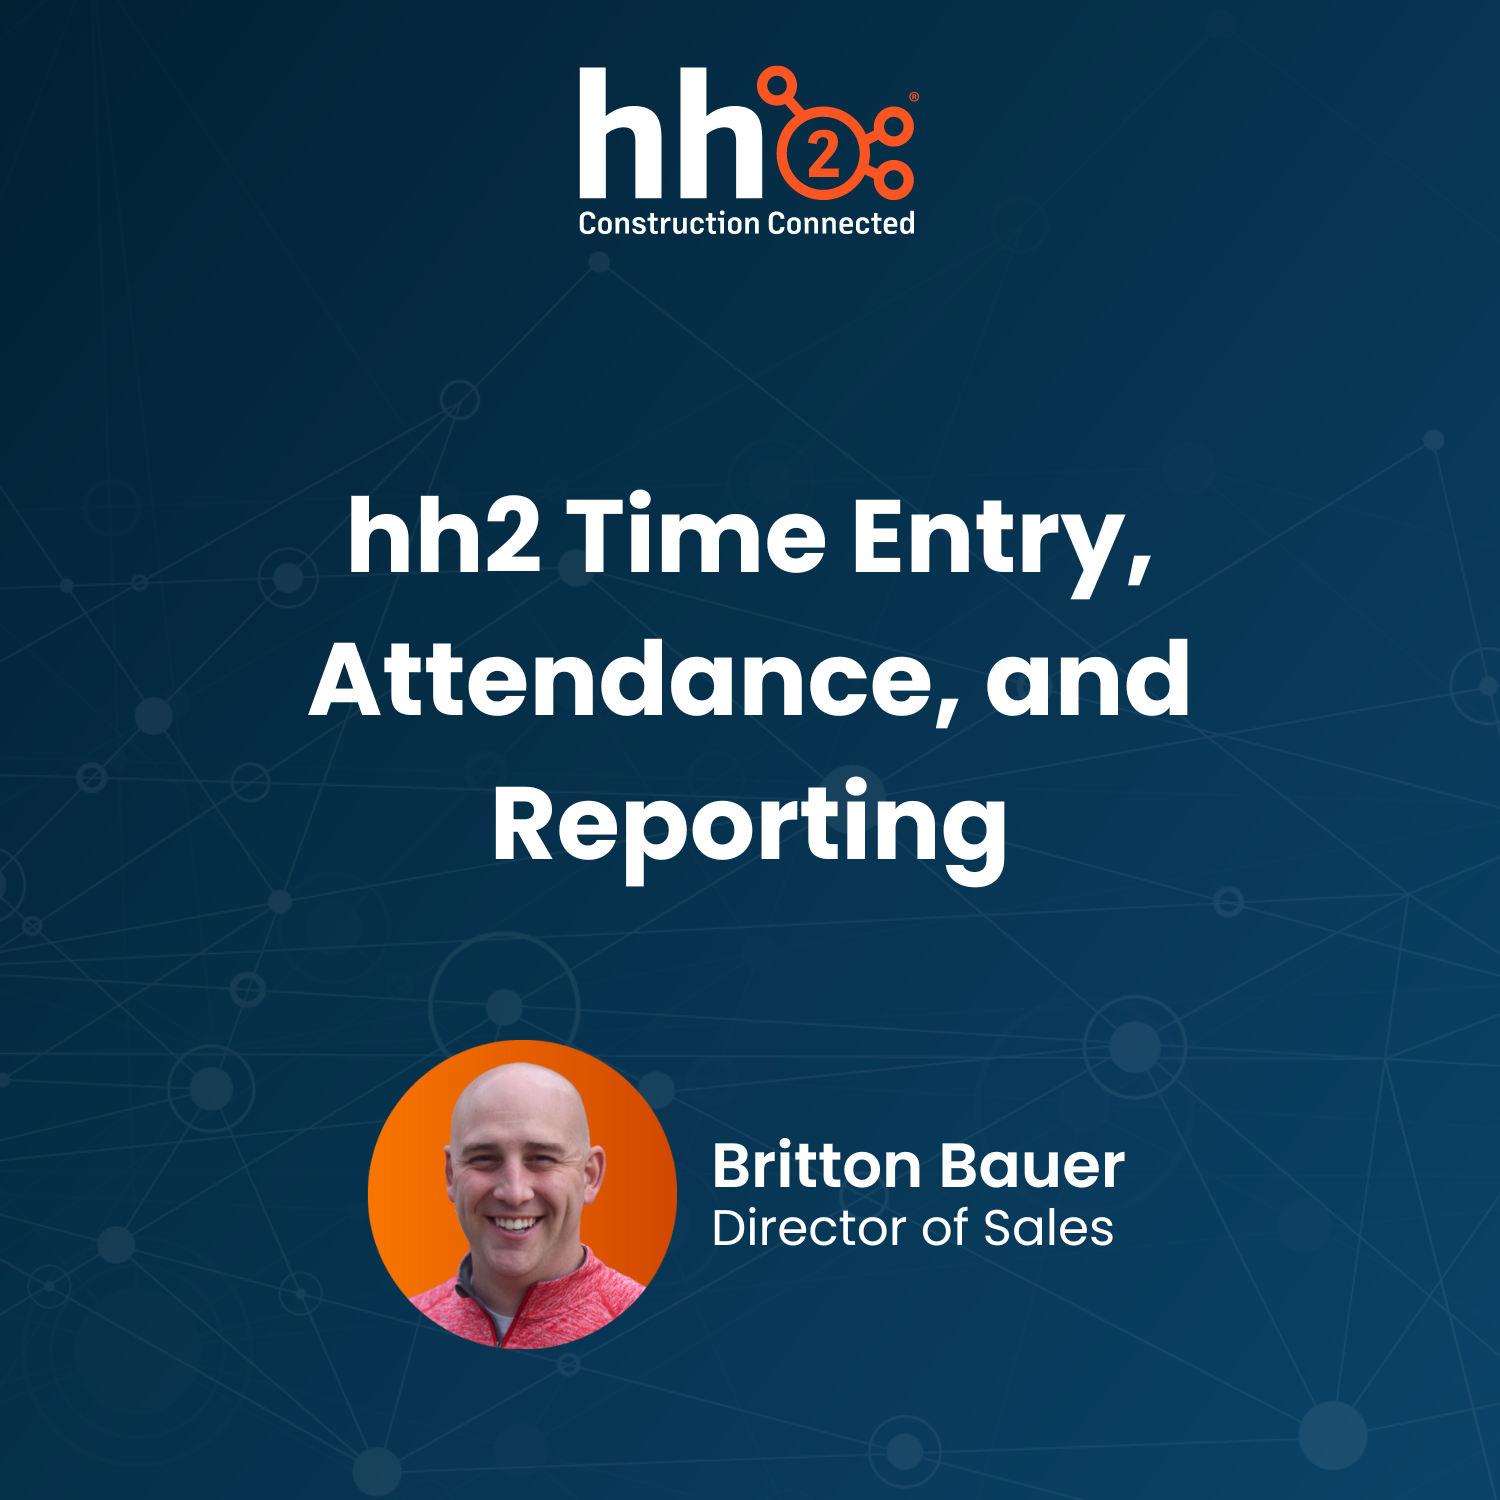 hh2 Time Entry, Attendance, and Reporting